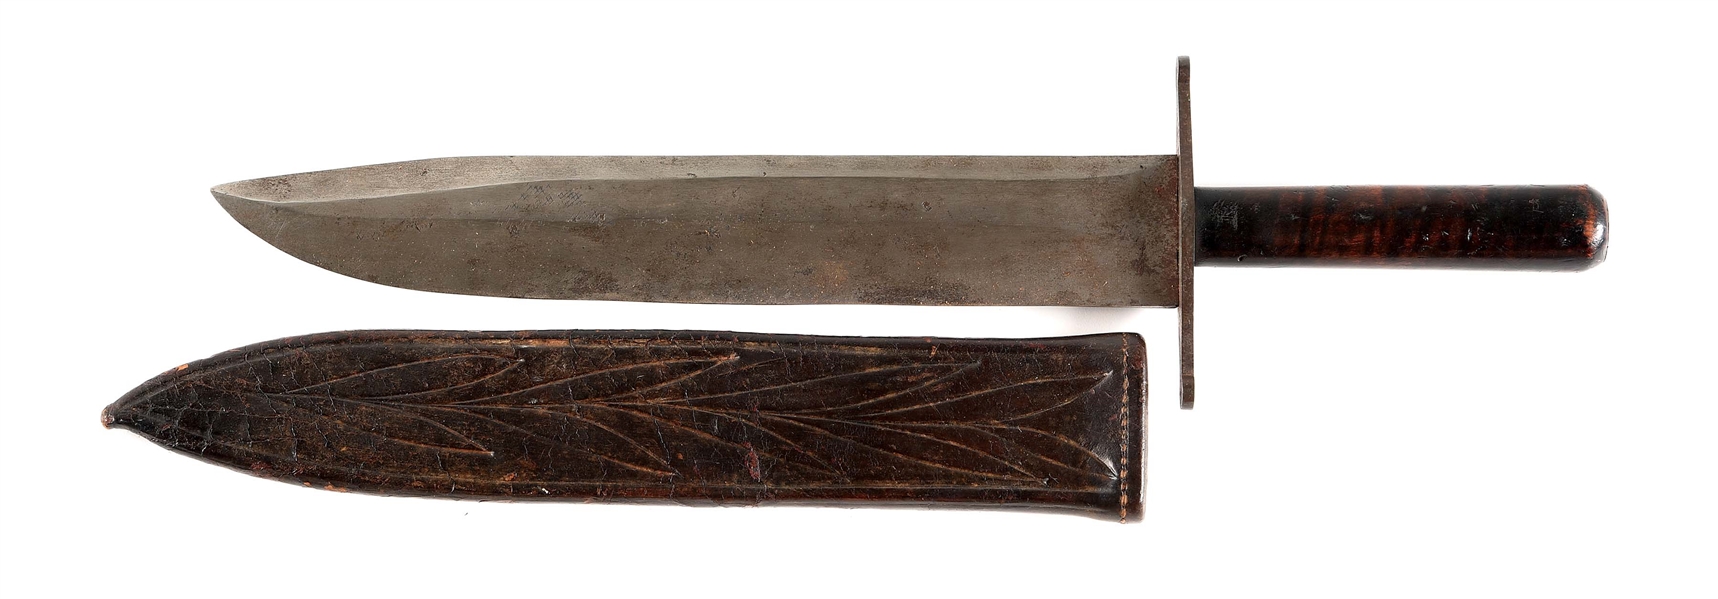 CIVIL WAR CONFEDERATE KNIFE, BOWIE BLADE MADE FROM FILE